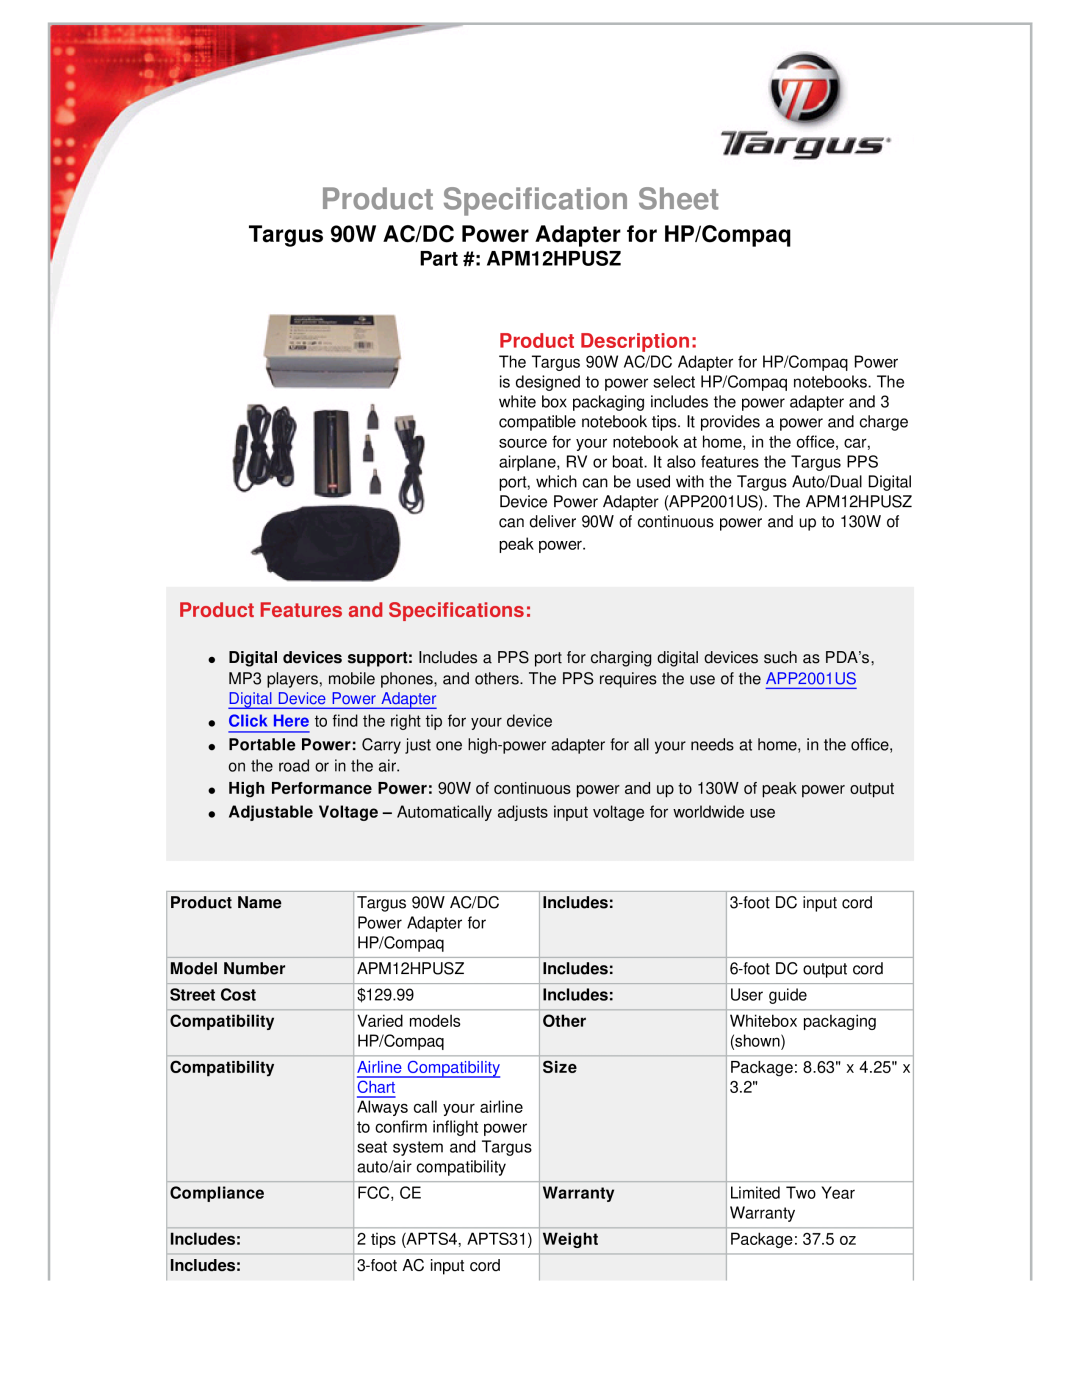 Compaq specifications Product Specification Sheet, Targus 90W AC/DC Power Adapter for HP/Compaq, APM12HPUSZ, Chart 